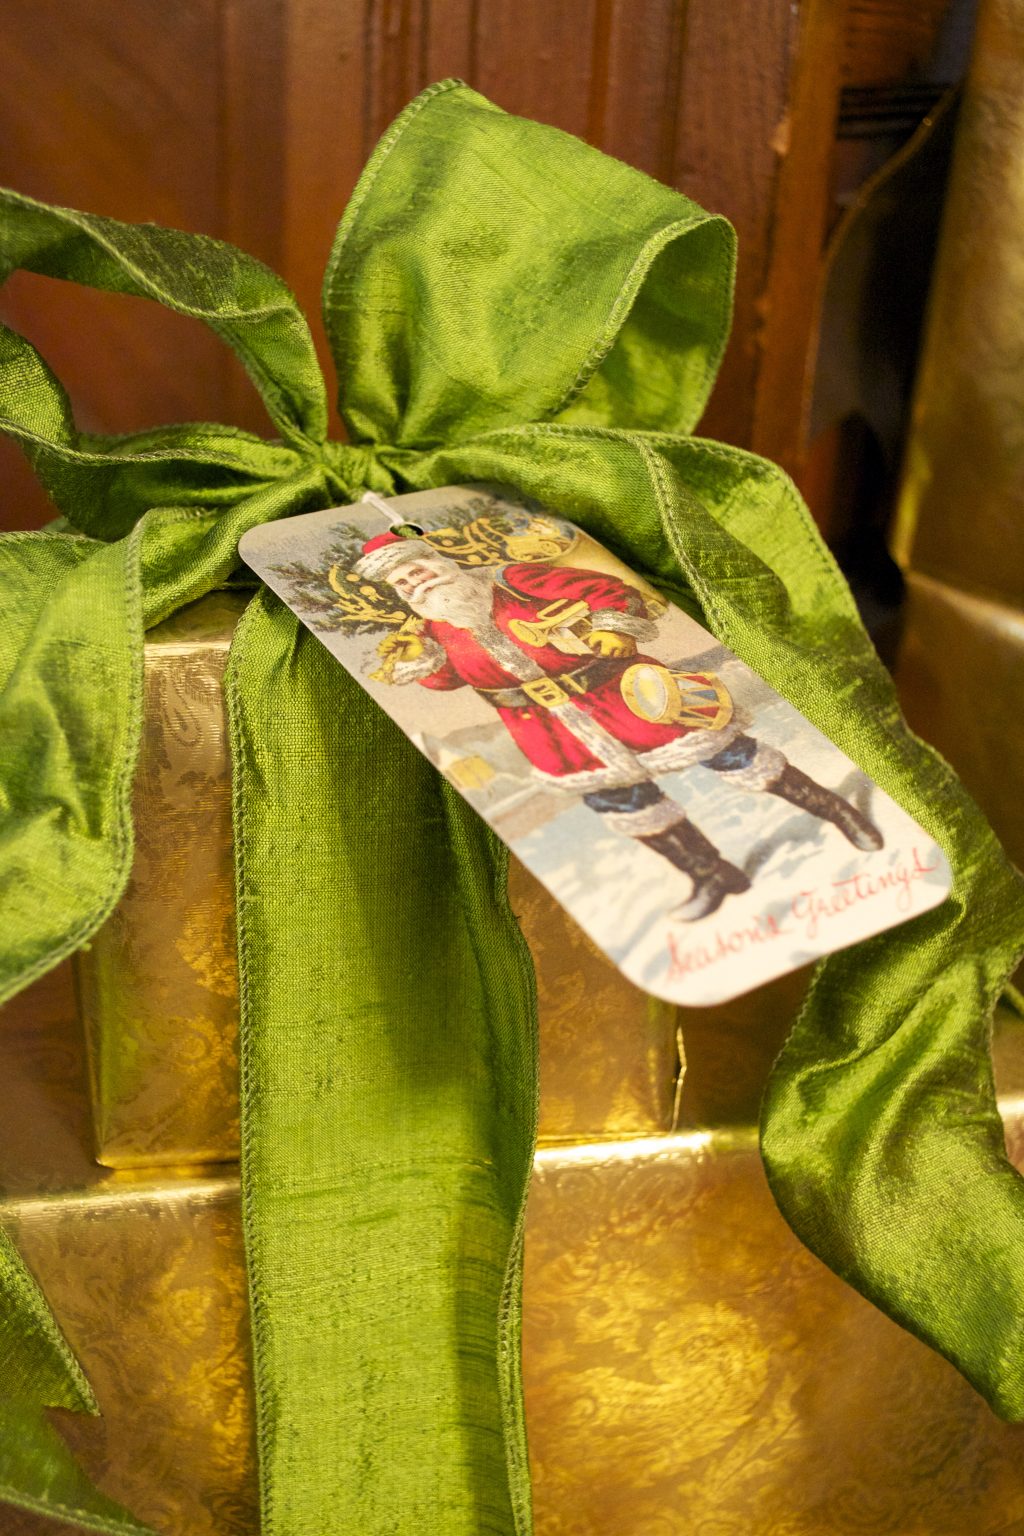 The silk duponi ribbon makes this stack of golden packages shine.